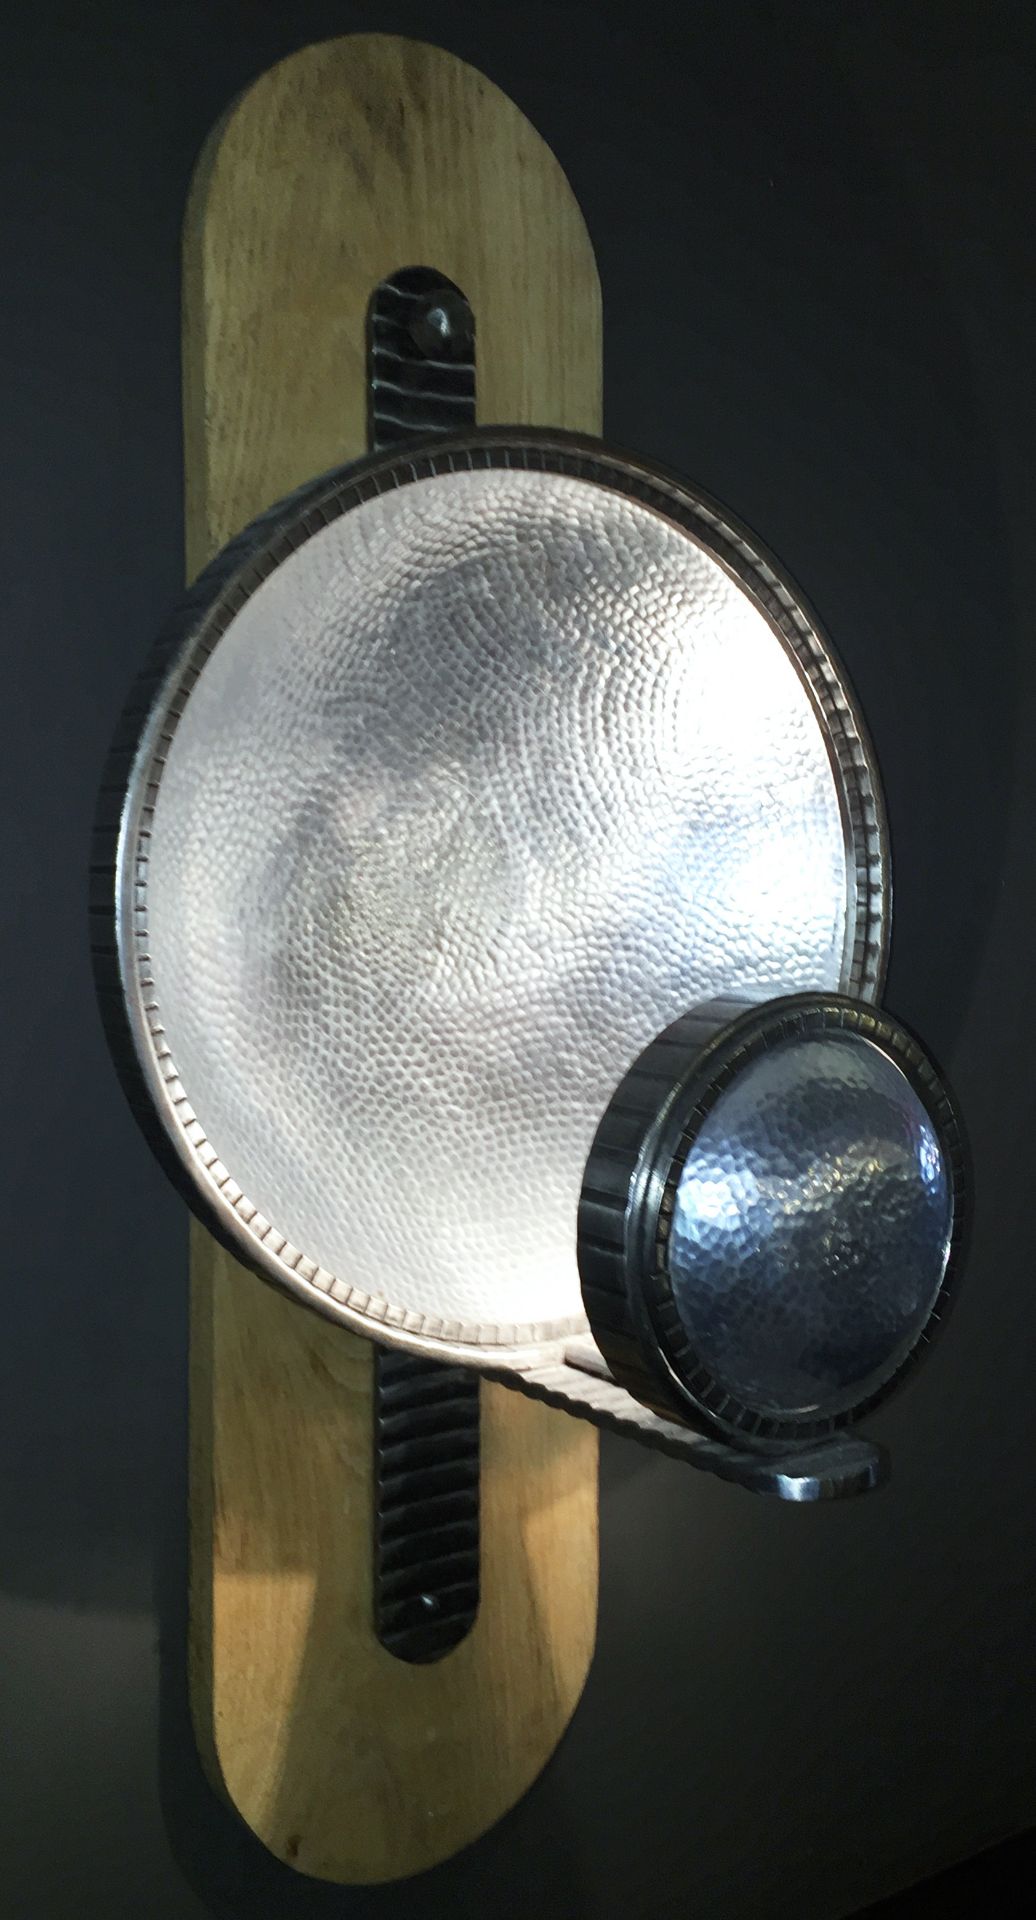 1 x Stunning Rustic Wall Sconce Light - Rustic Mounted Plank With Large Pitted Reflector - Ideal For